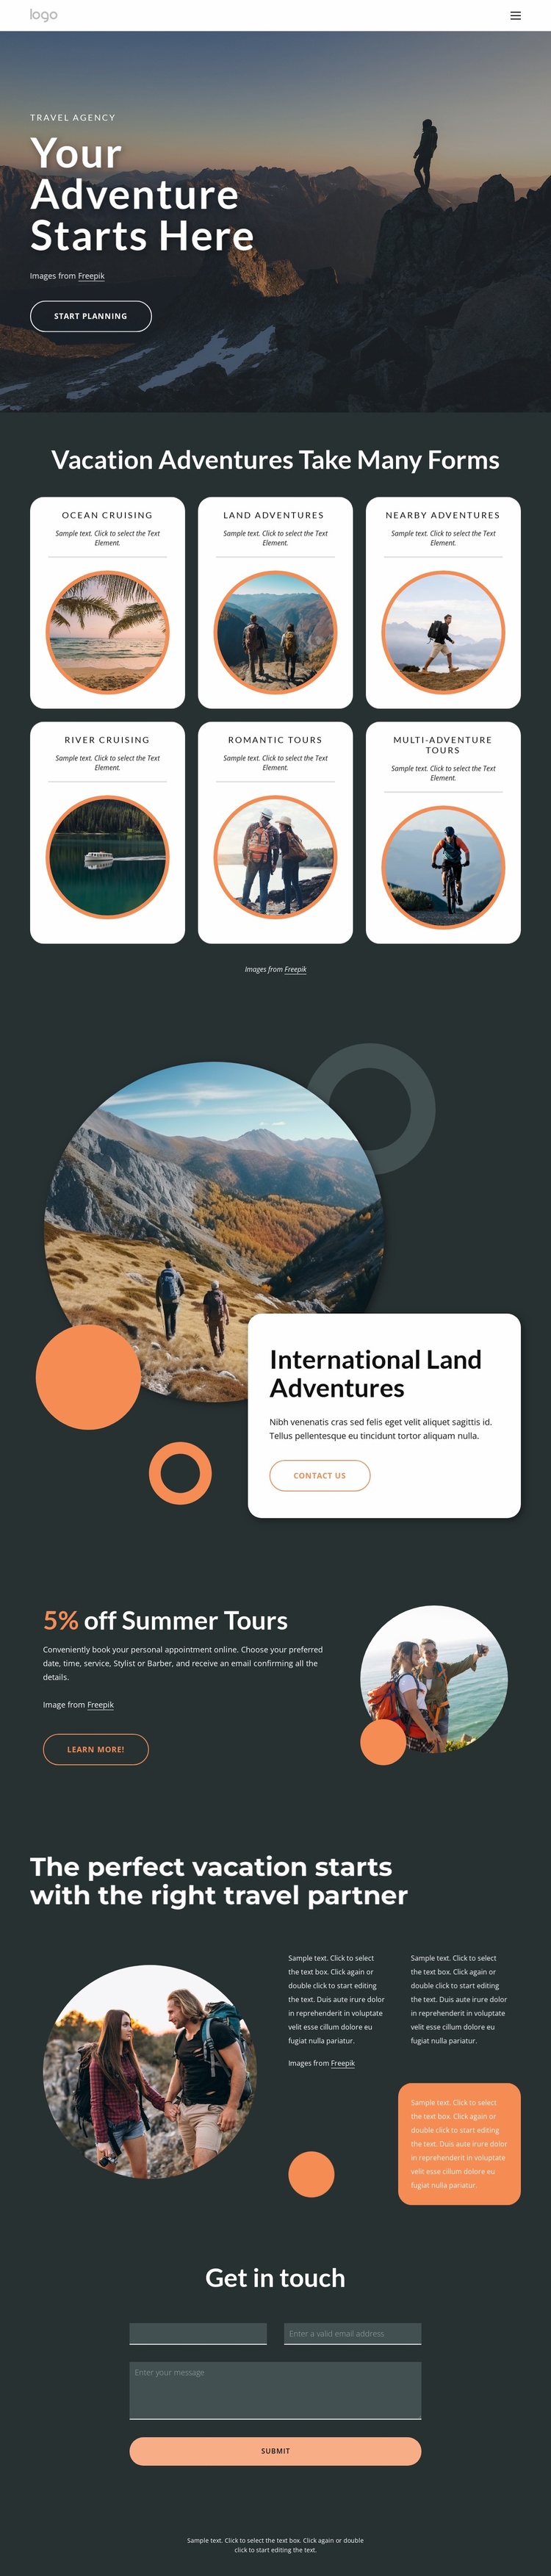 Your adventures starts here Landing Page